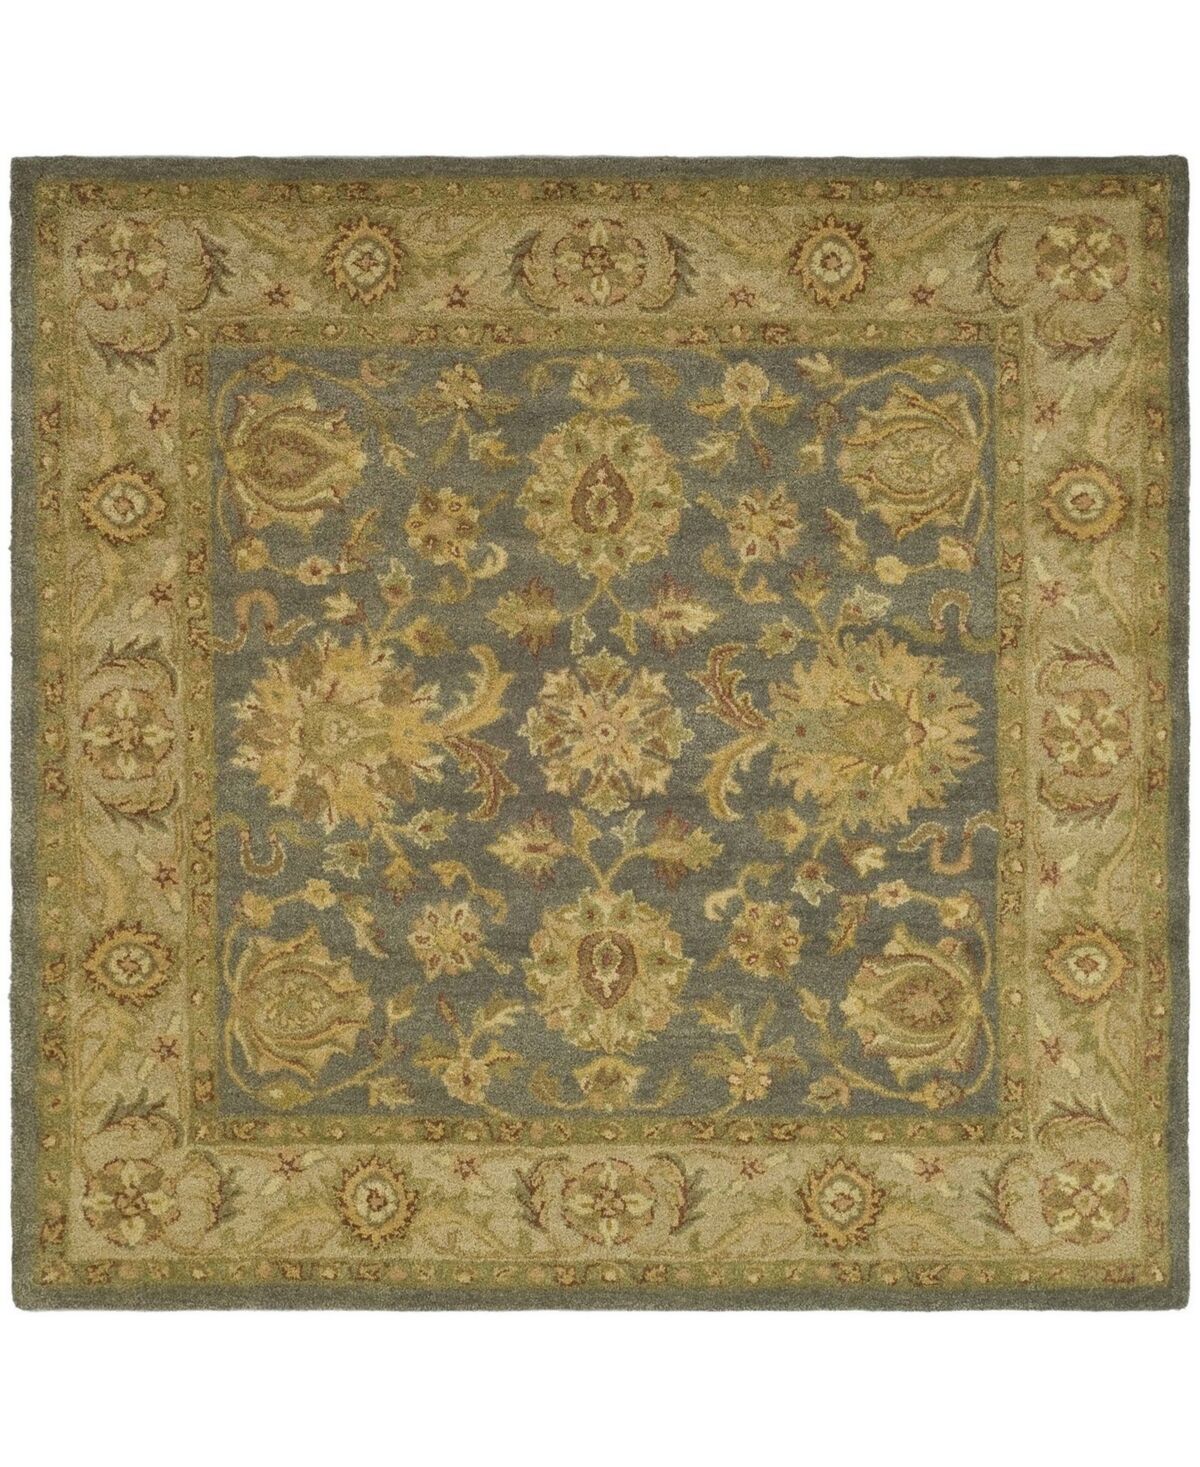 Safavieh Antiquity At312 Blue and Beige 6' x 6' Square Area Rug - Blue